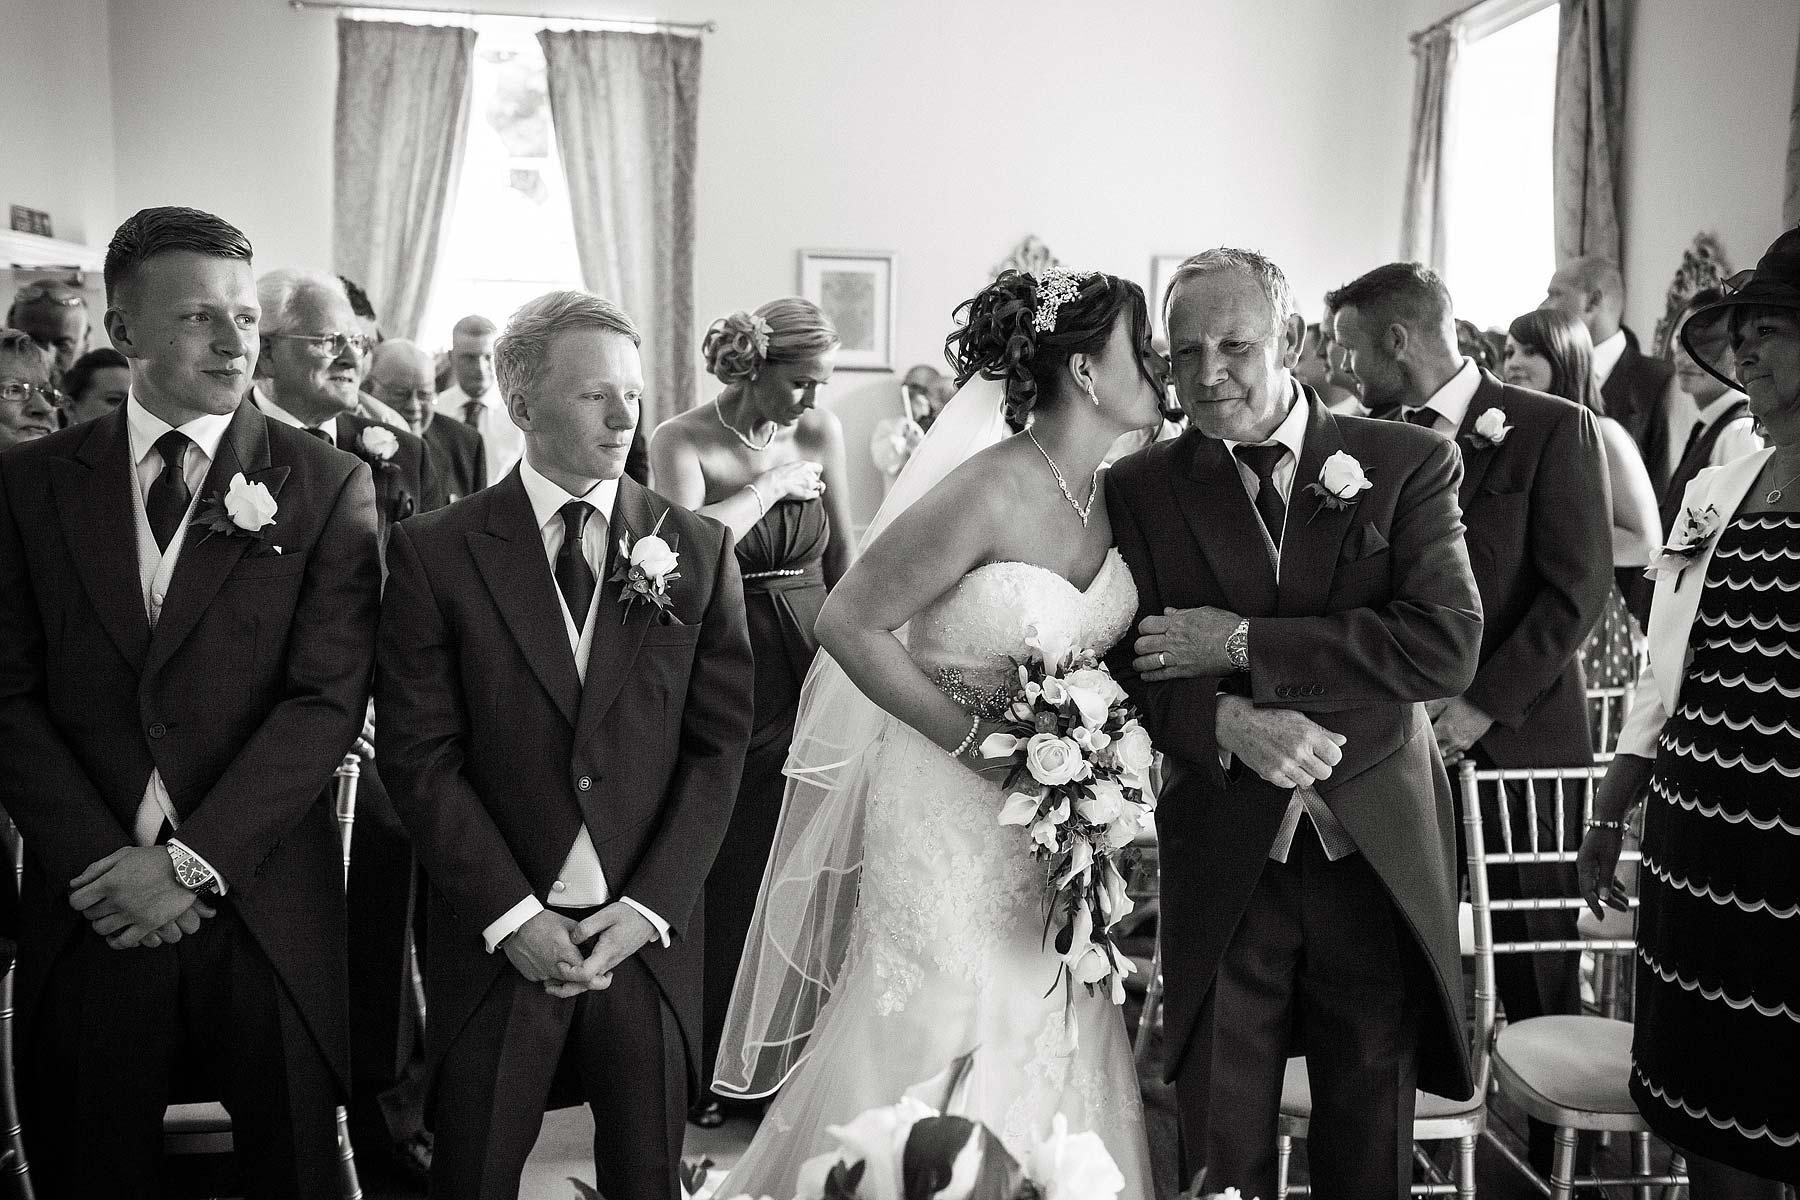 Wedding photographs that tell the story of the emotion and excitement of the wedding ceremony at Somerford Hall in Brewood by Reportage Wedding Photographer Stuart James